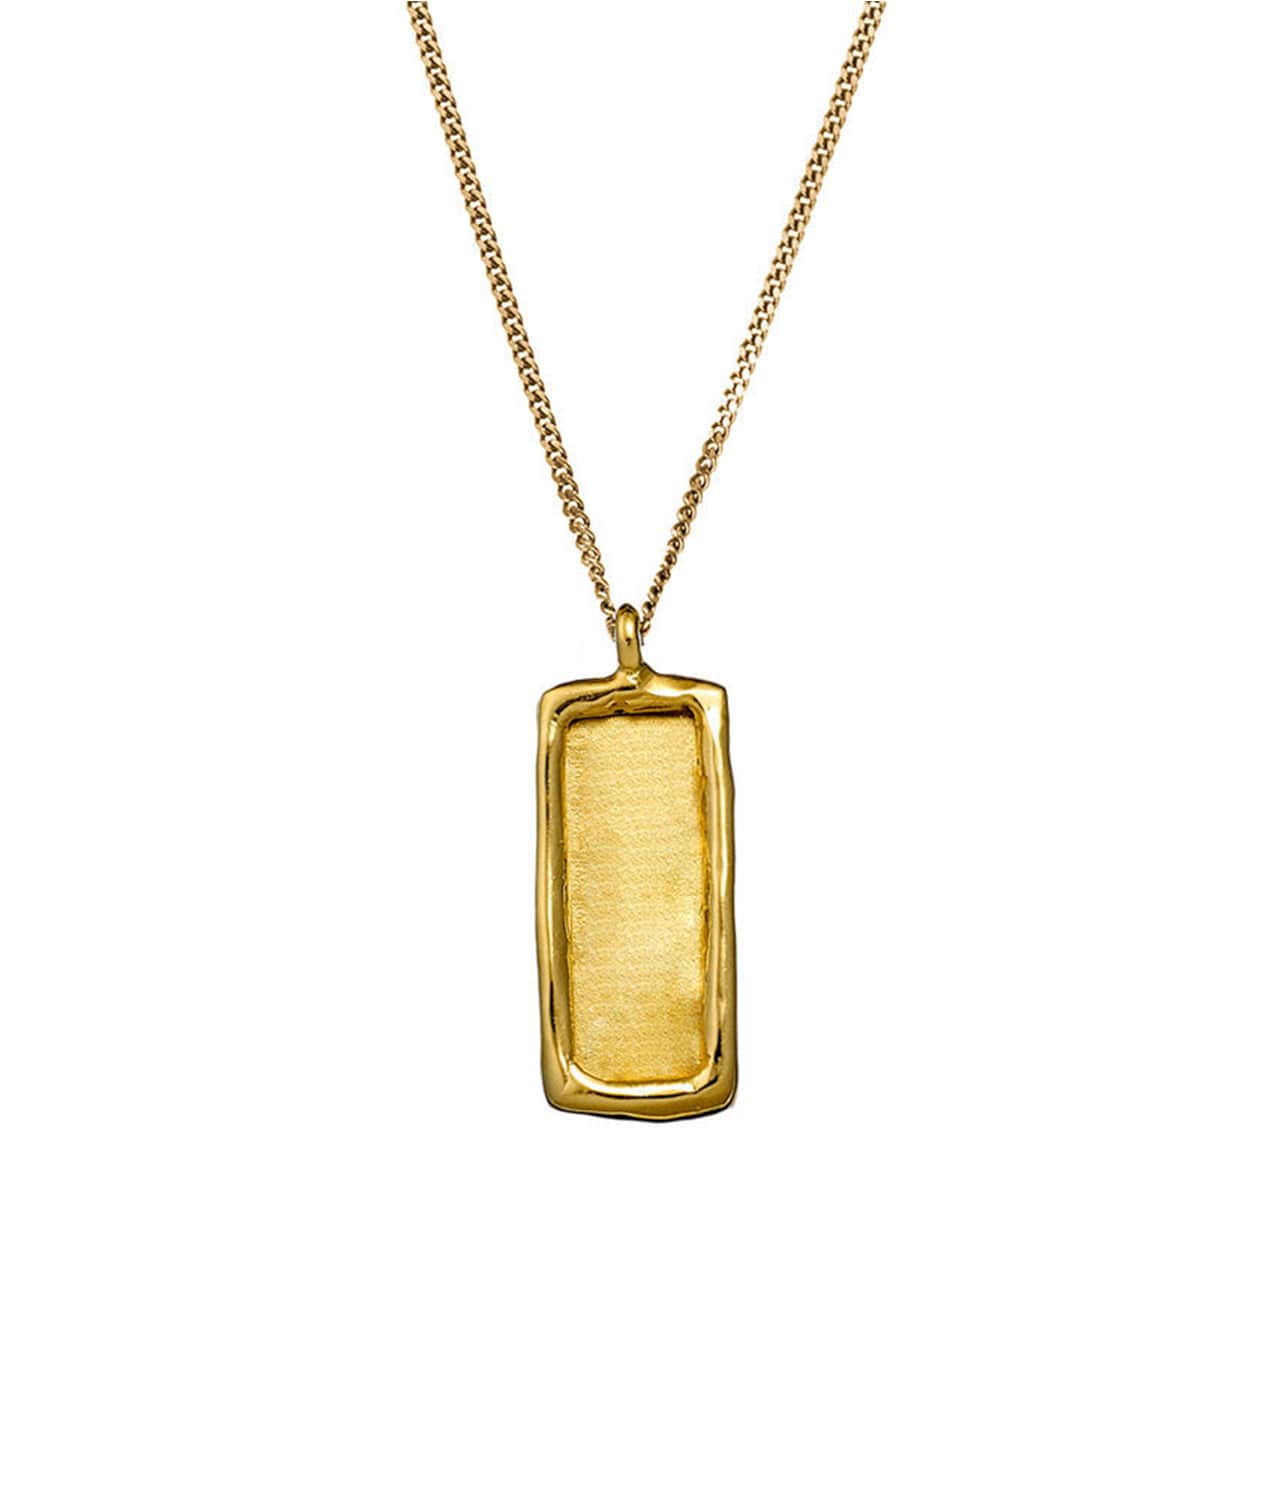 CLASSIC ID TAG NECKLACE - GOLD | HOLLY RYAN HOLLY RYAN CLASSIC ID TAG NECKLACE - GOLD 50CM